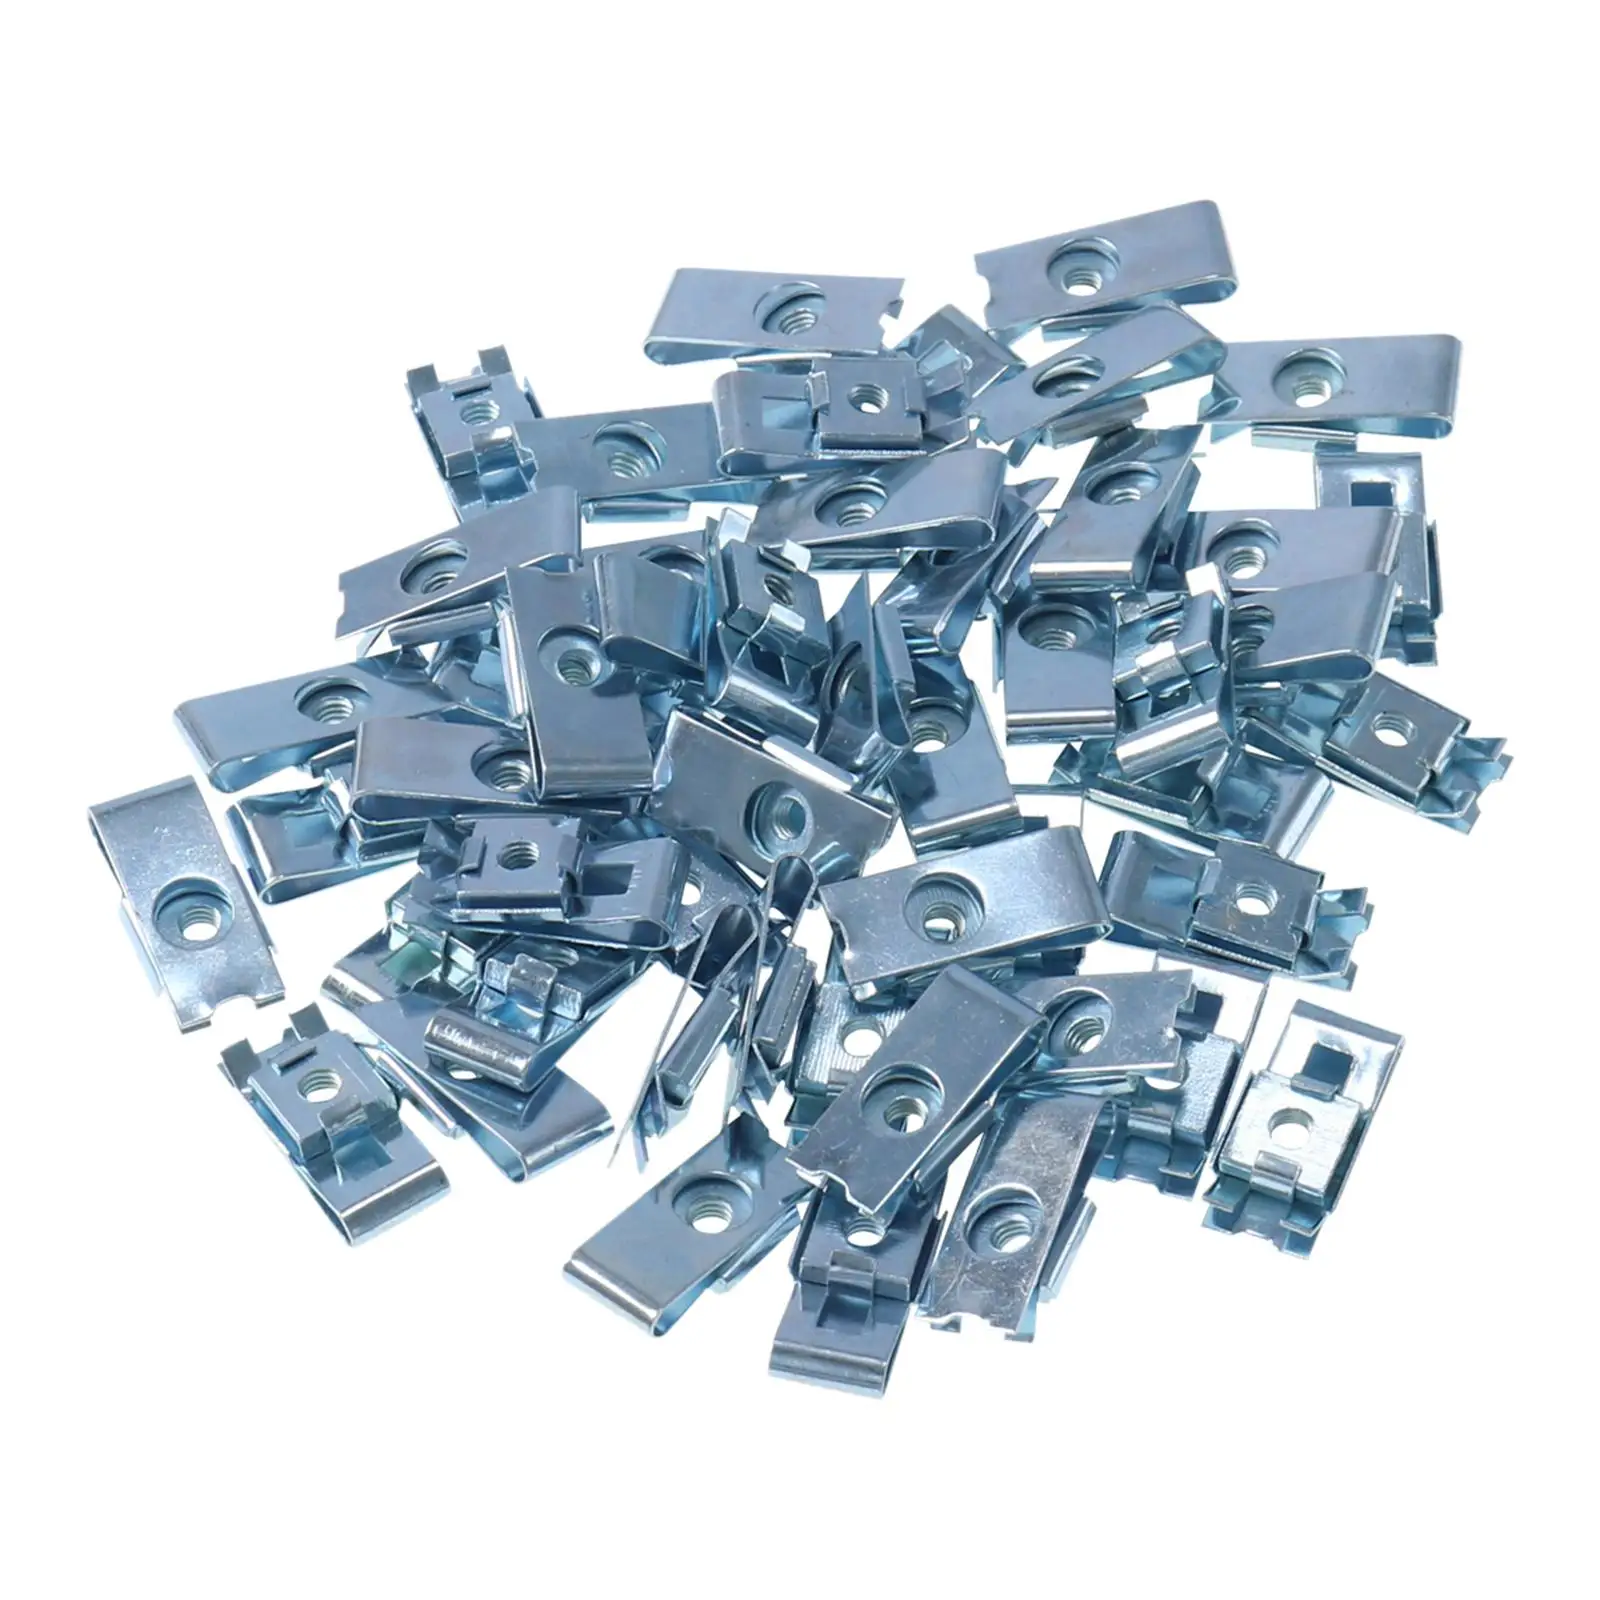 50Pcs Rustproof nuts Clips, Motorbike Spare Parts Accessories Replacement High Strength Retaining Clip Speed Fasteners